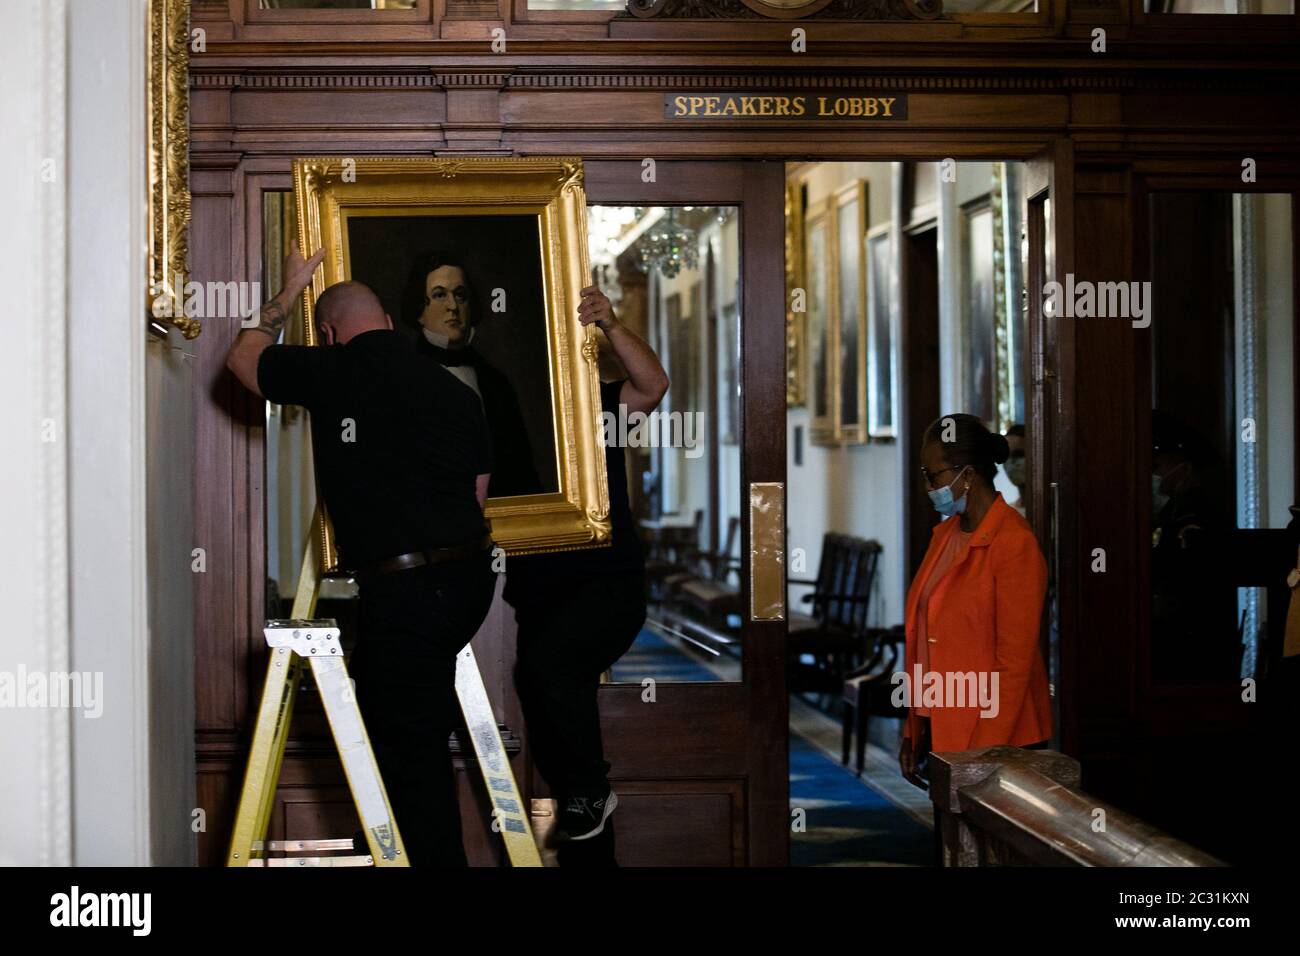 House Clerk Cheryl Johnson looks on as Architect of the Capitol maintenance workers remove a portrait of former Confederate House Speaker Howell Cobb, outside of the House Chambers in the US Capitol Building in Washington, DC on Thursday, June 18, 2020. House Speaker Nancy Pelosi ordered the paintings of four House speakers who served in the Confederacy to be removed. The portraits that were removed are of Robert Mercer Taliaferro Hunter of Virginia, Howell Cobb of Georgia, James Lawrence Orr of South Carolina and Charles Frederick Crisp of Georgia. Pool Photo by Nicholas Kamm/UPI Stock Photo